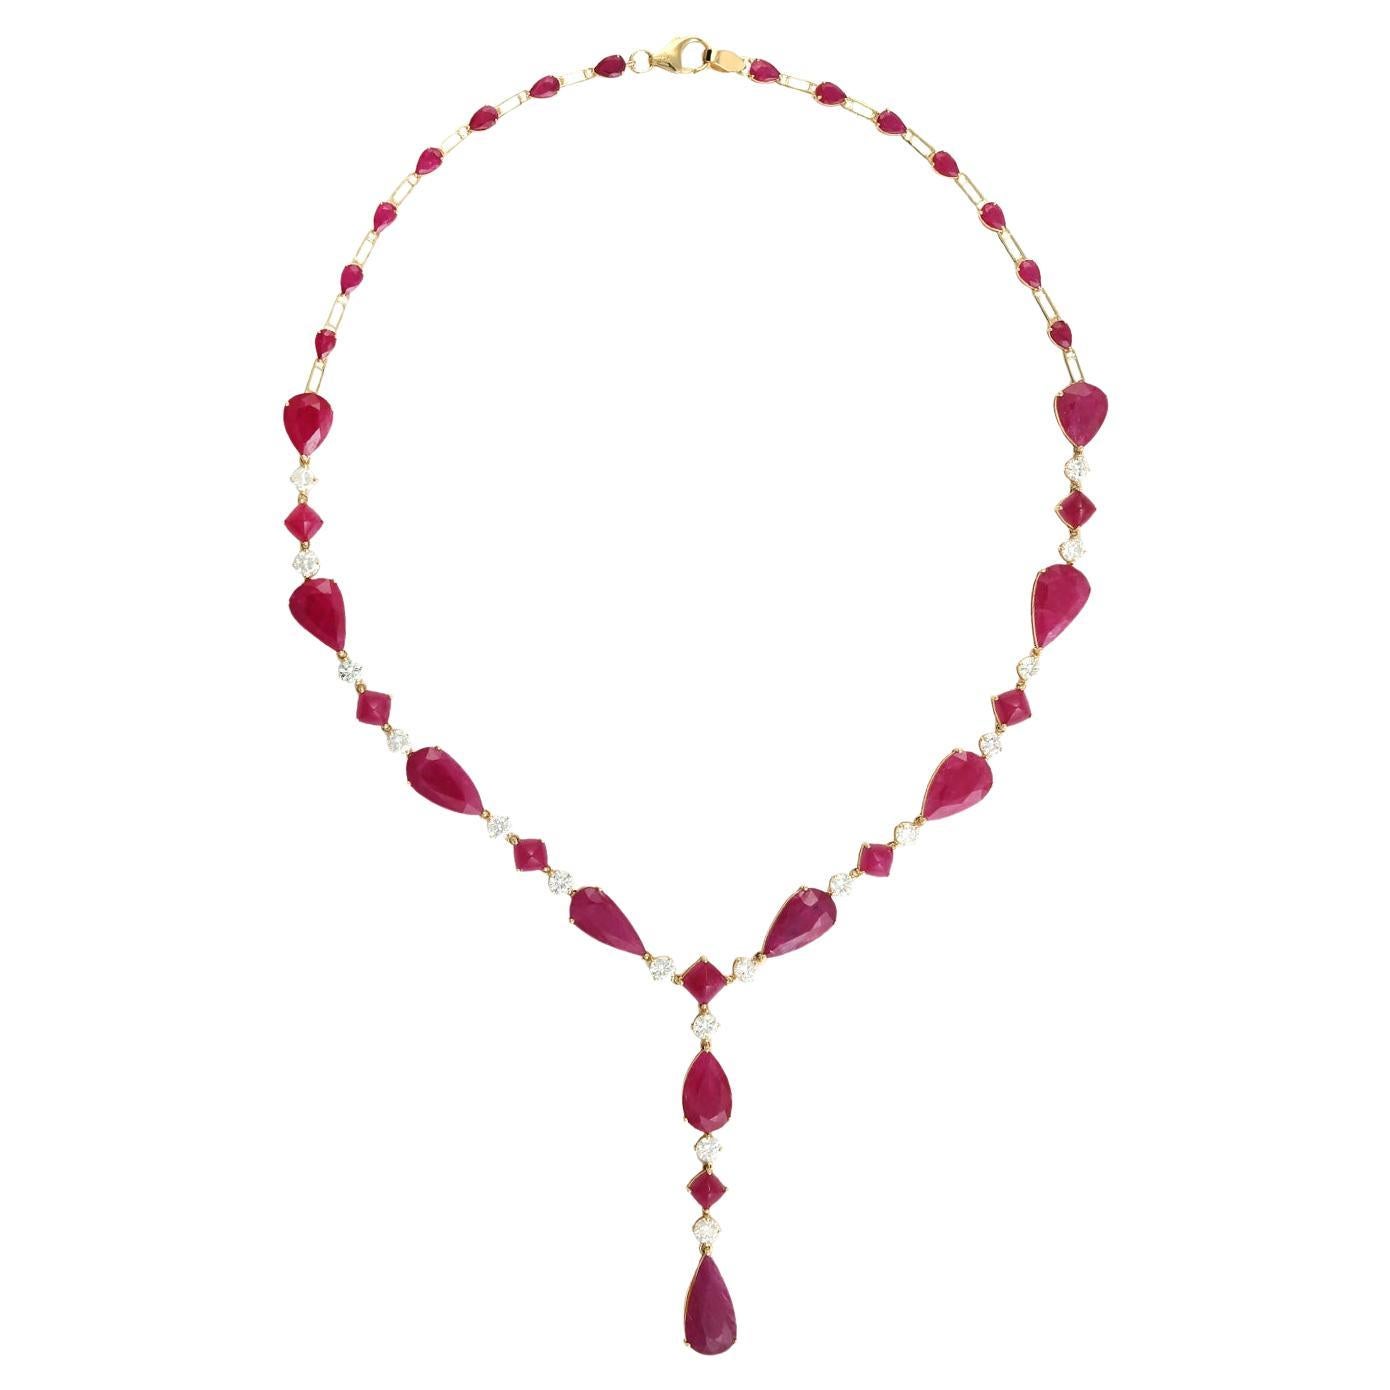 Tear Drop Mosambic Ruby Link Necklace With Diamonds Made In 18k Yellow Gold